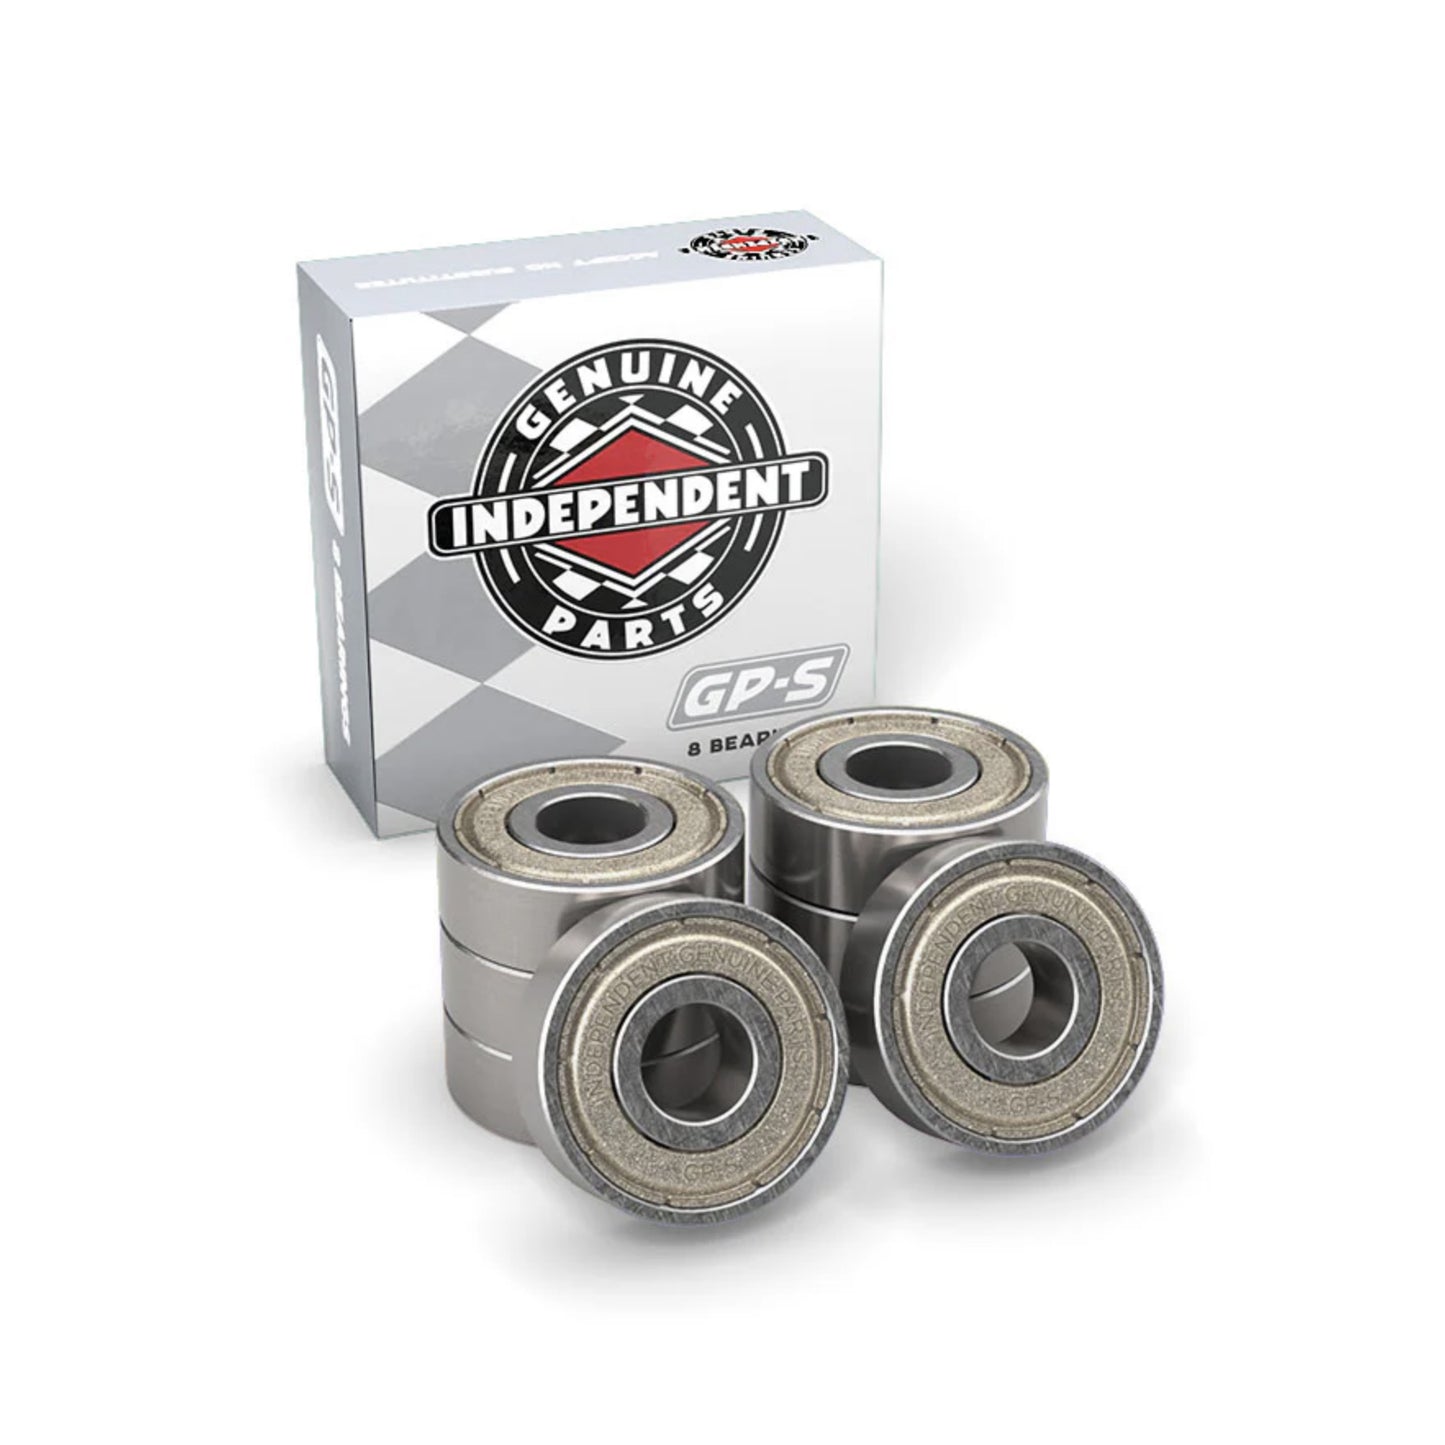 Independent GP-S Bearings